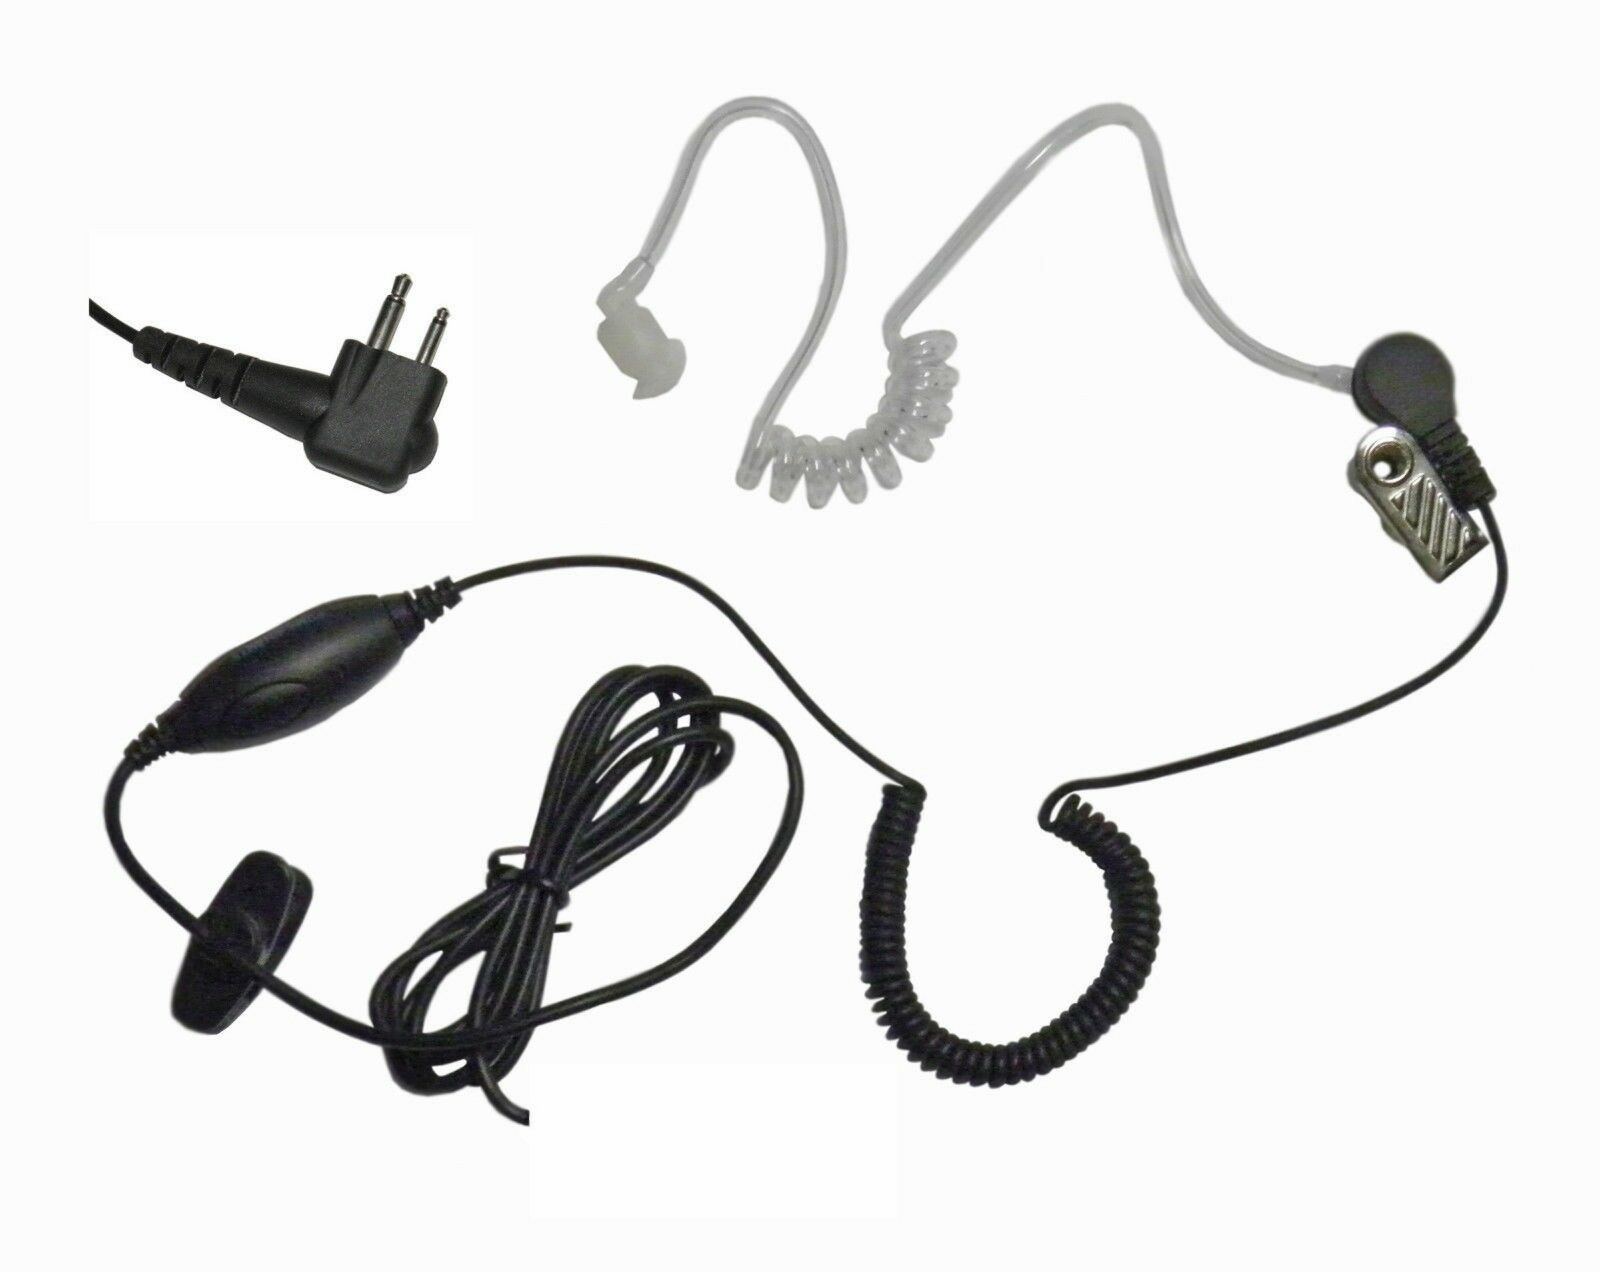 Clear Earbud Microphone For Motorola 2 Pin Radios Including Cp200 Cp185 P110